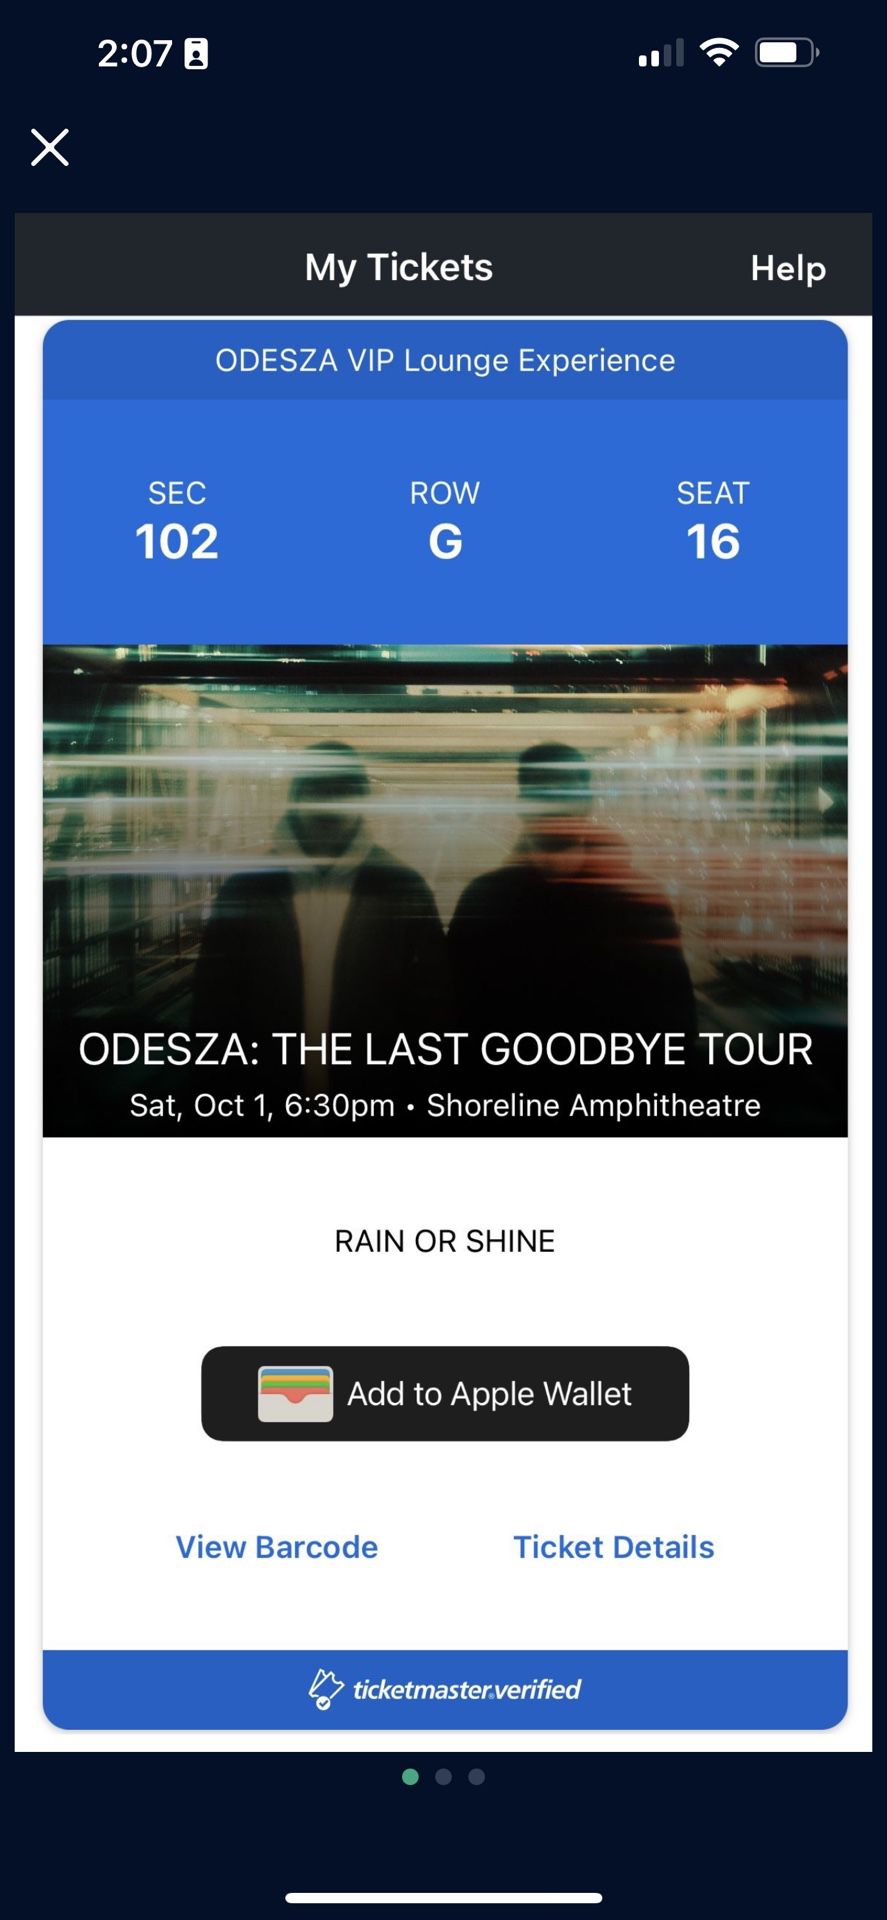 1 VIP ticket to ODESZA this Saturday at Shoreline - DM me for details!